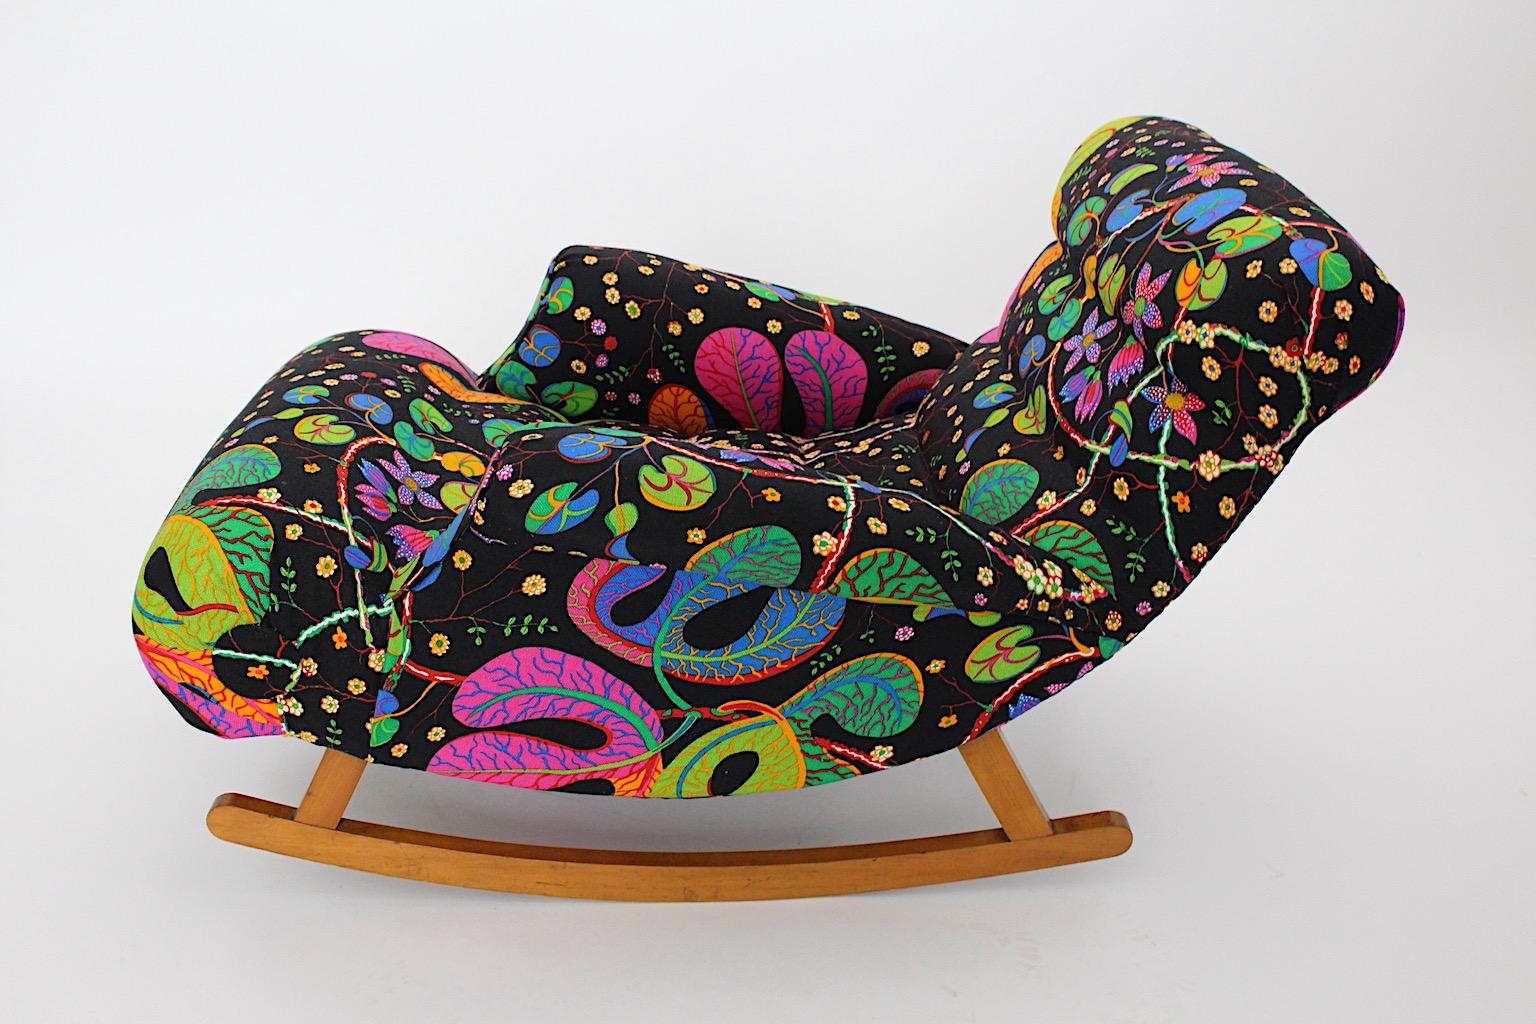 Early 20th Century Art Deco Adolf Loos Style Josef Frank Fabric Vintage Rocking Lounge Chair 1920s  For Sale